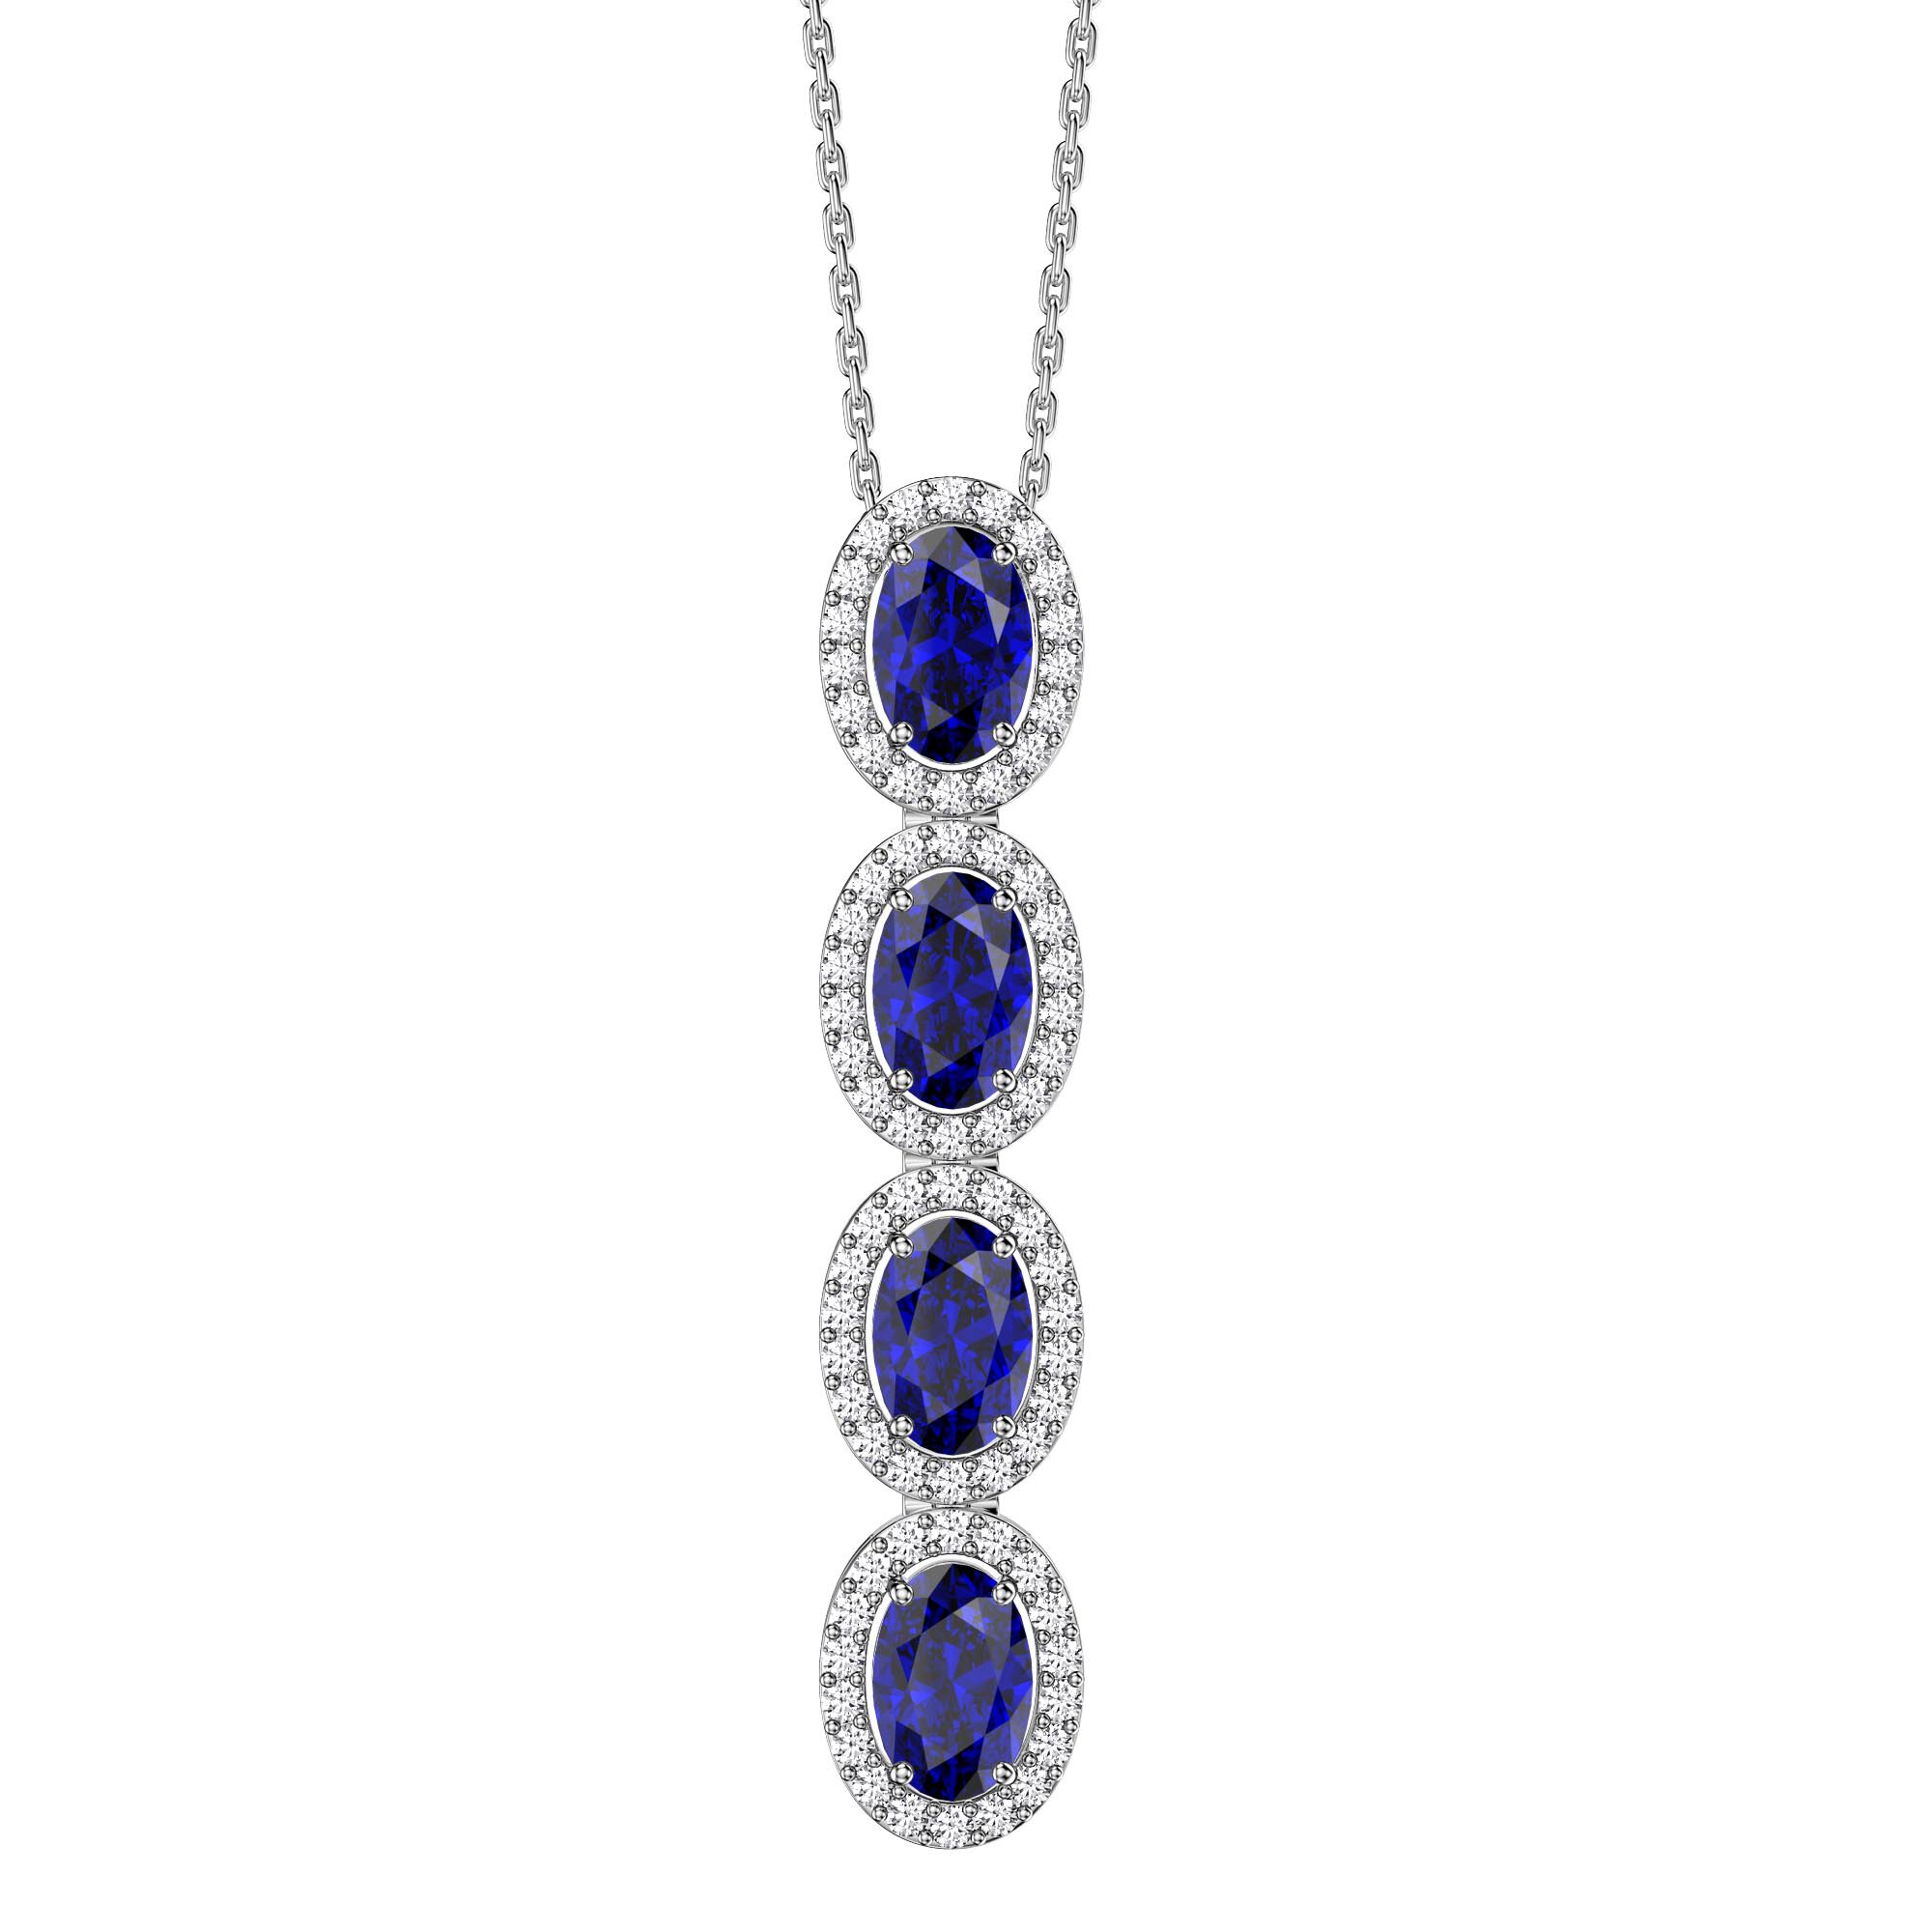 Oval blue sapphire necklace with diamonds